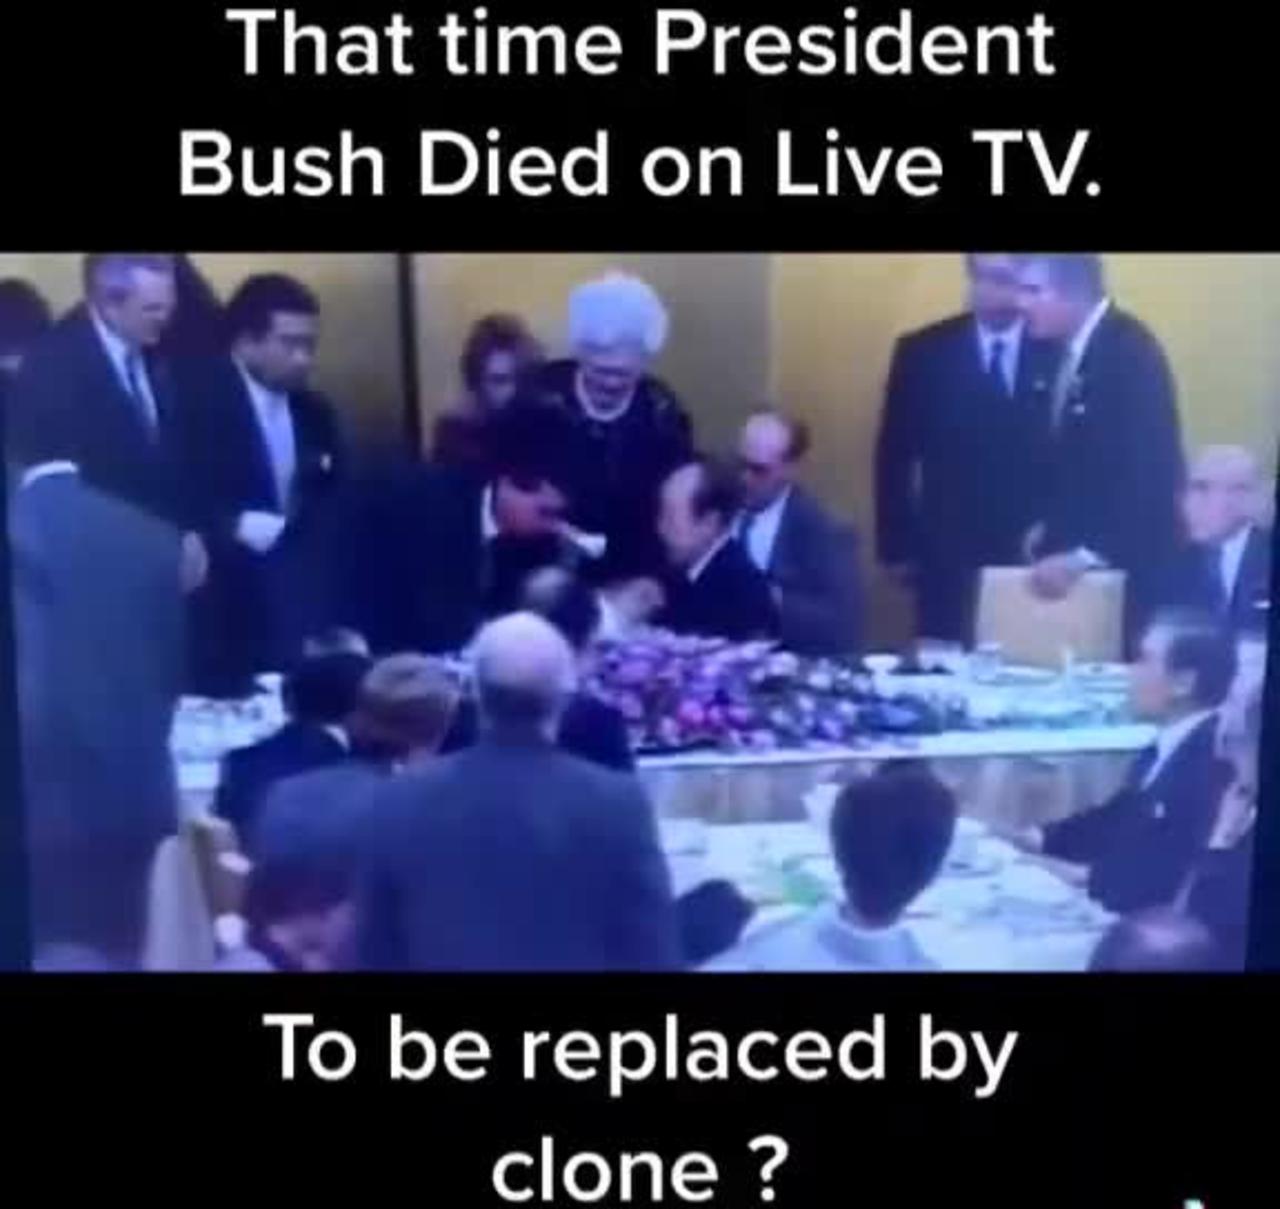 THAT TIME PRESIDENT BUSH DIED LIVE ON TV  — TO BE REPLACED BY A CLONE